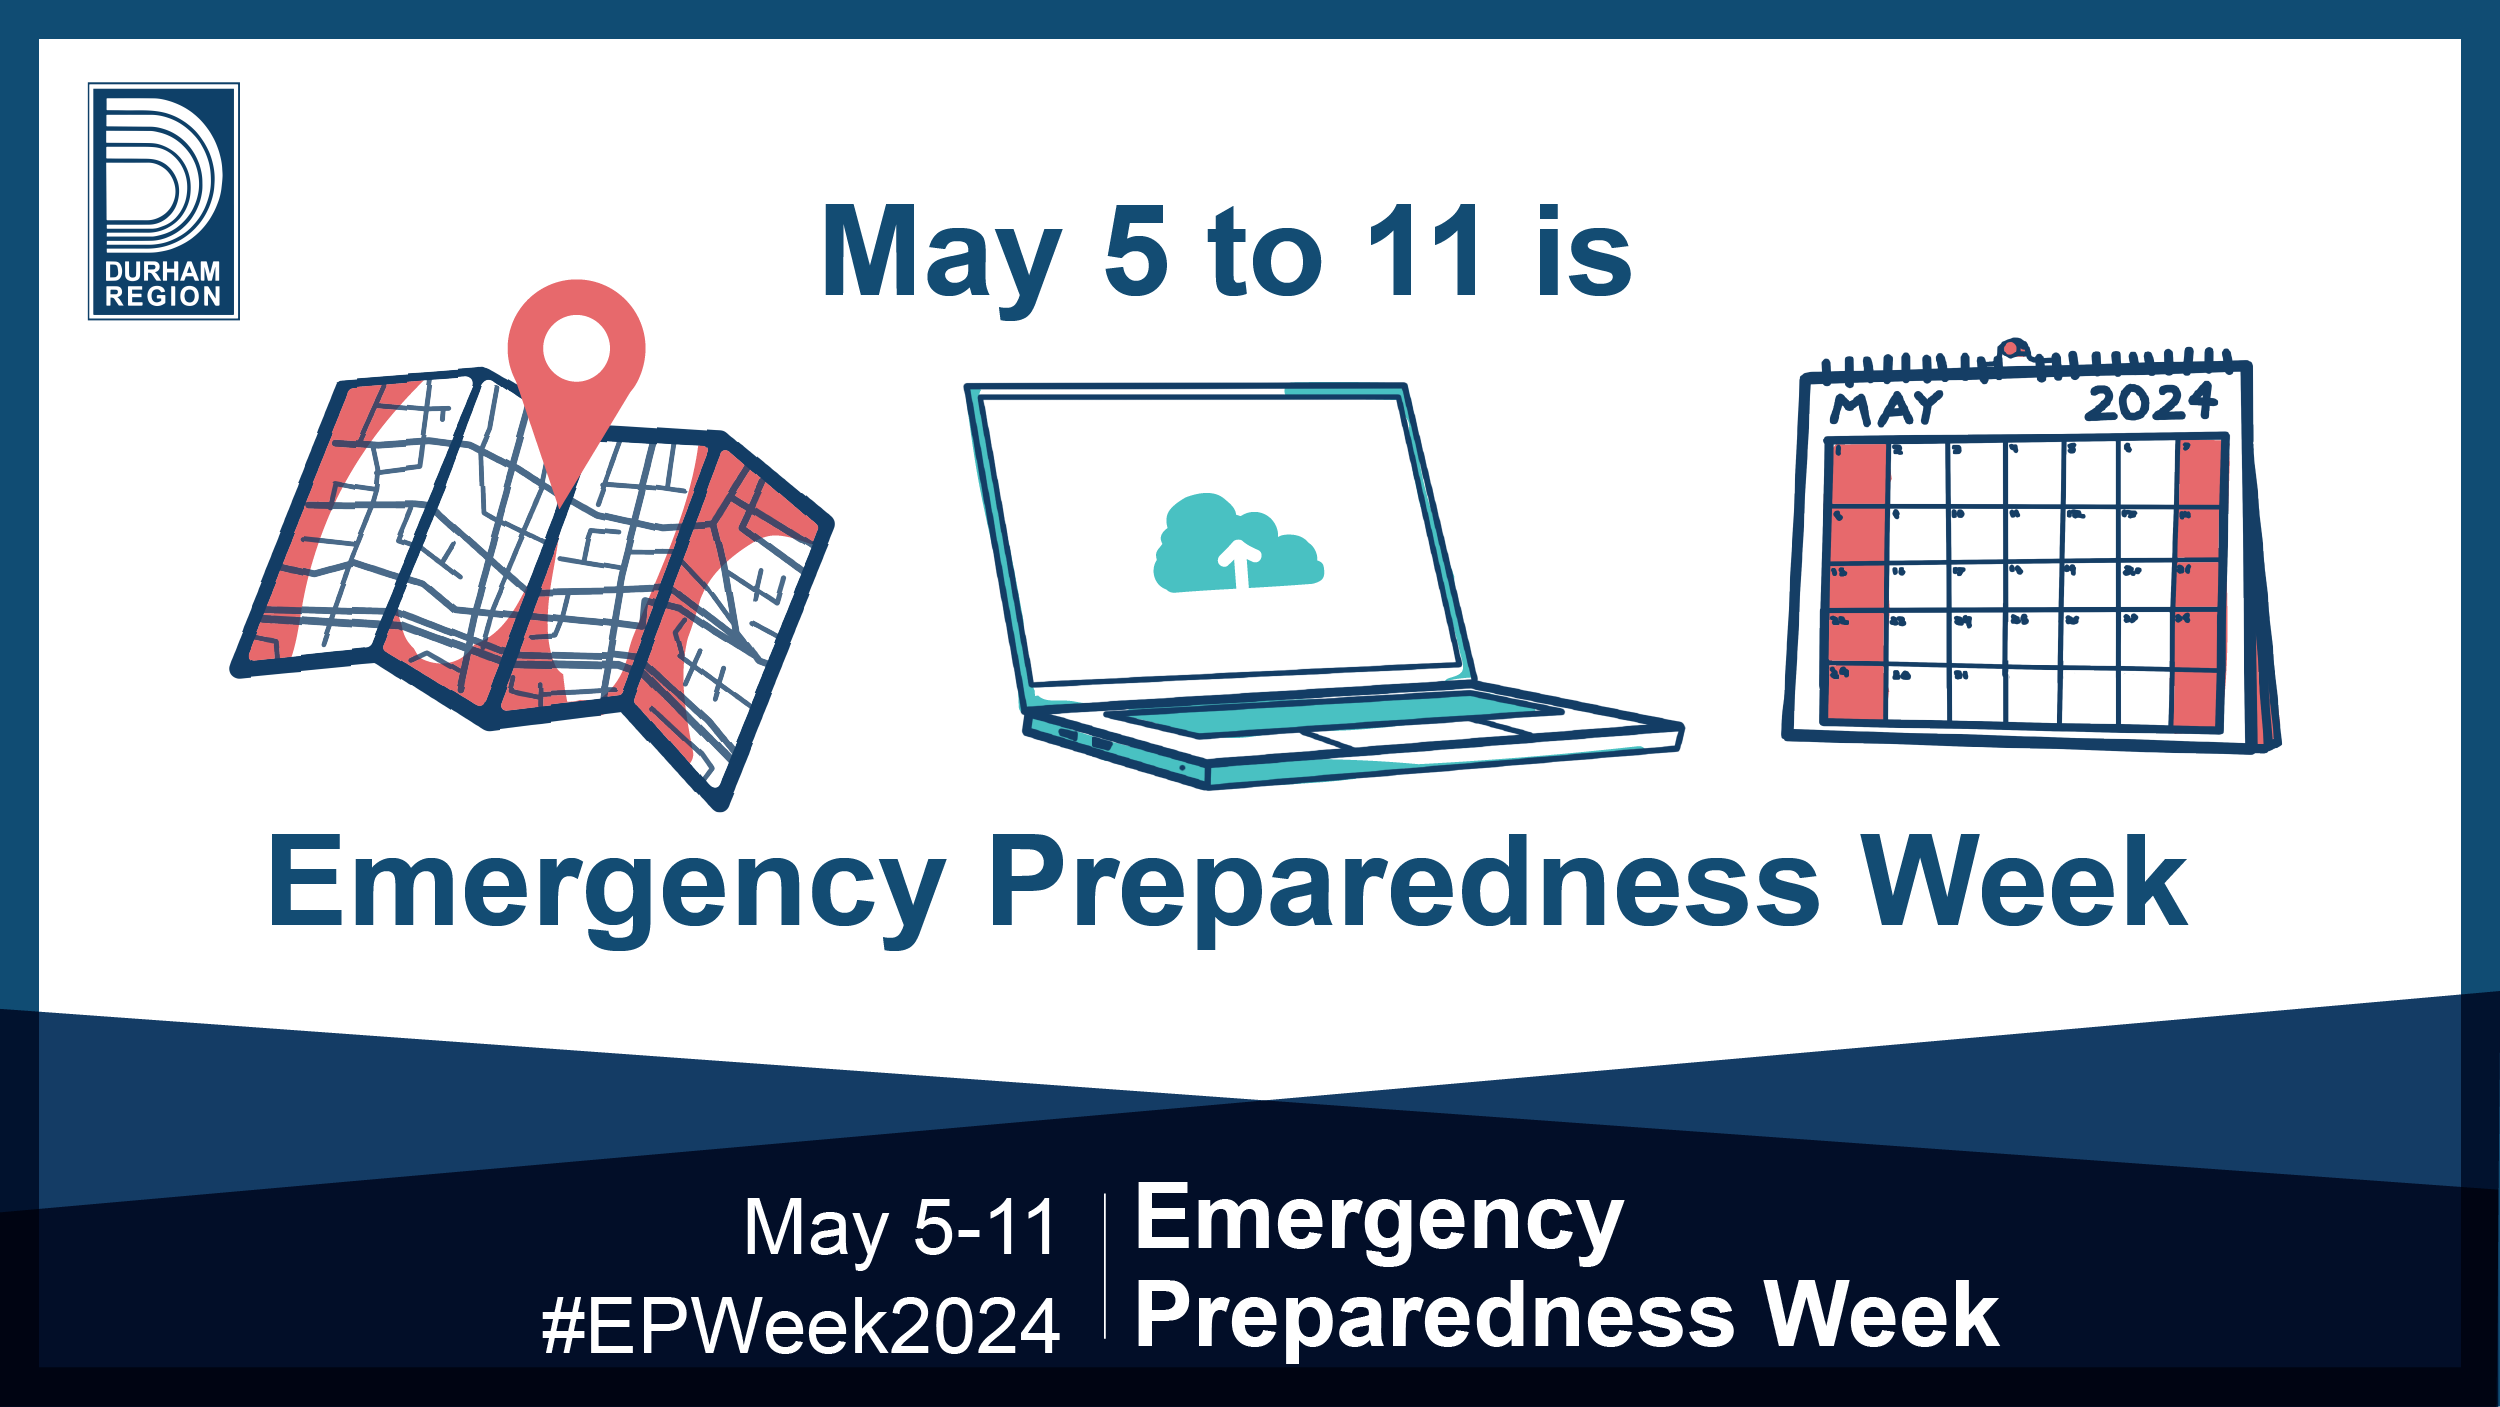 Illustrated map, laptop computer and calendar with text above and below that reads May 5 to 11 is Emergency Preparedness Week. More text below that reads May 5-11 Emergency Preparedness Week #EPWeek2024.